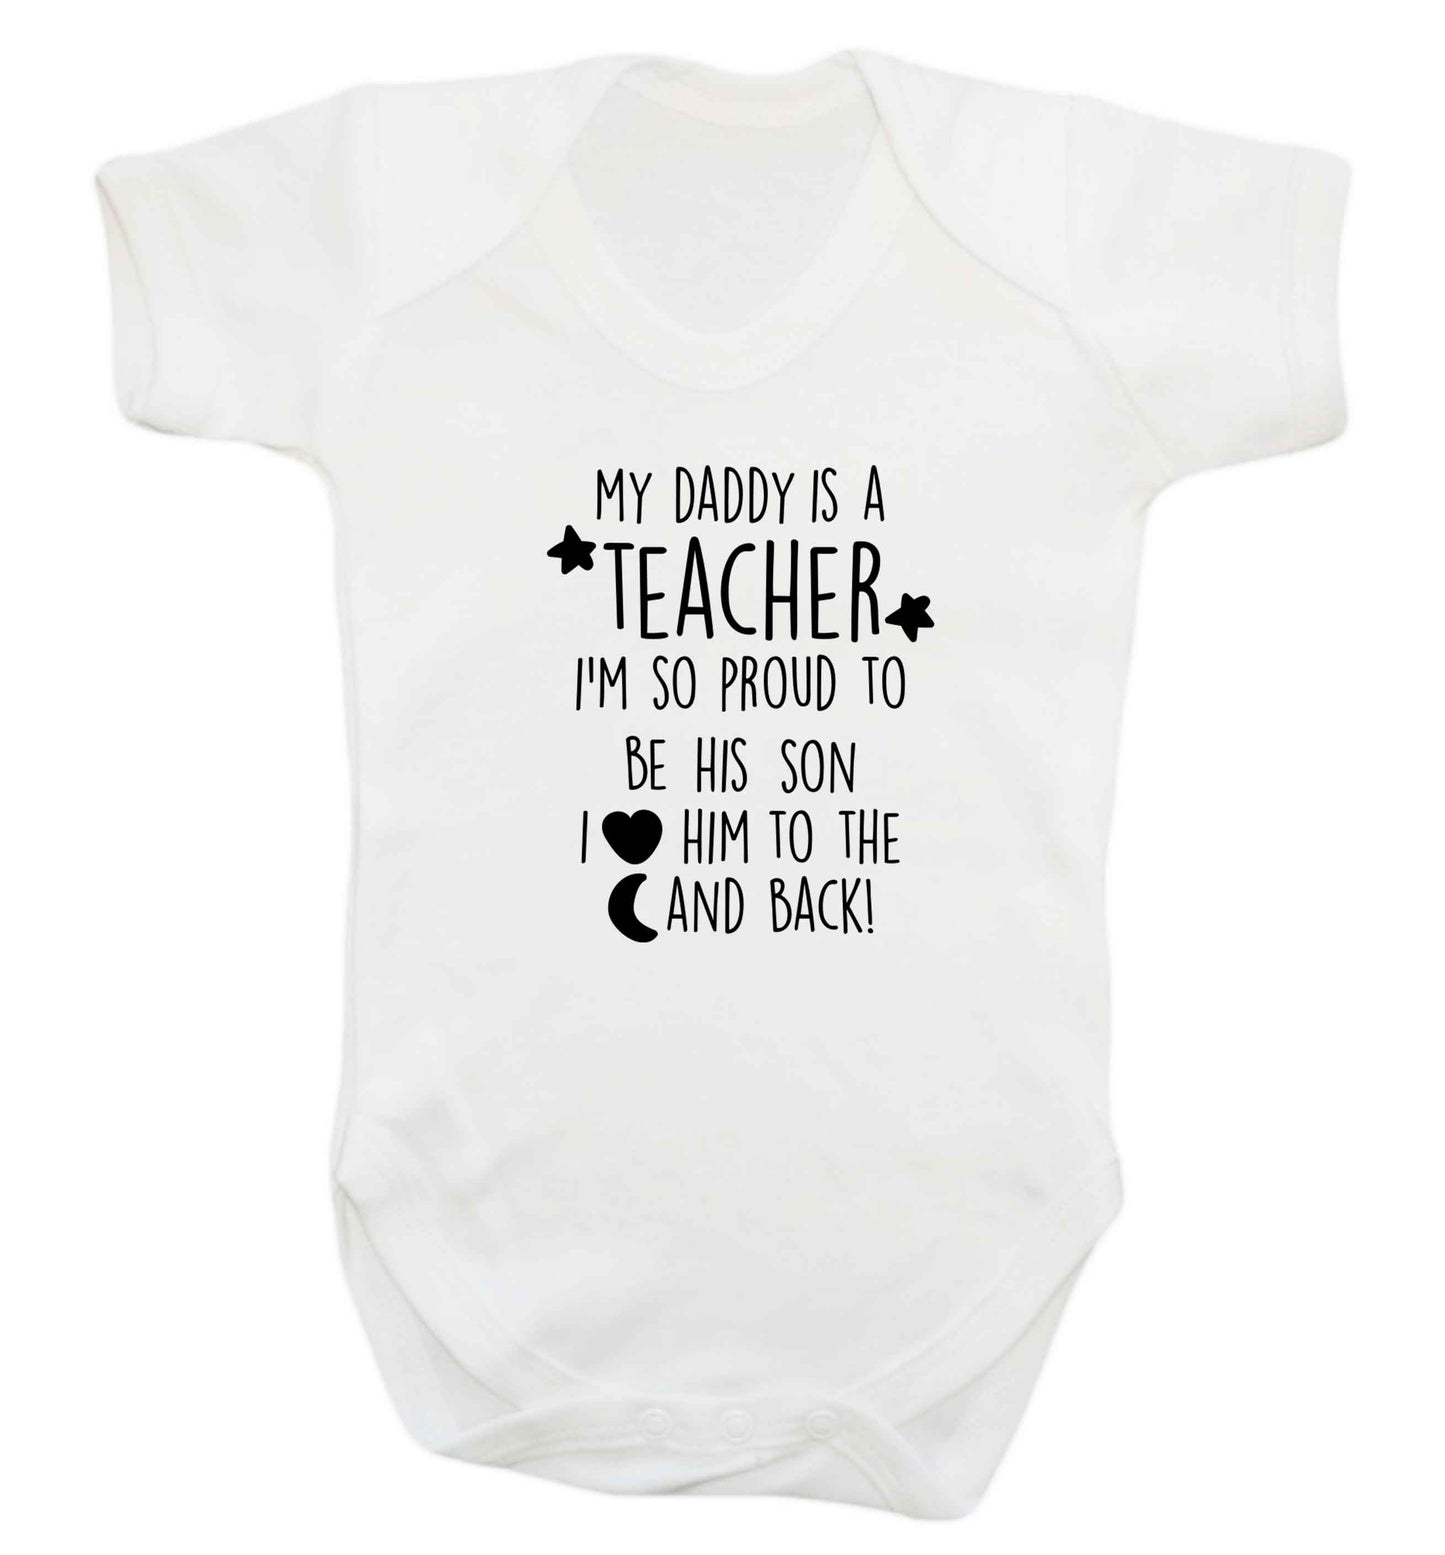 My daddy is a teacher I'm so proud to be his son I love her to the moon and back baby vest white 18-24 months